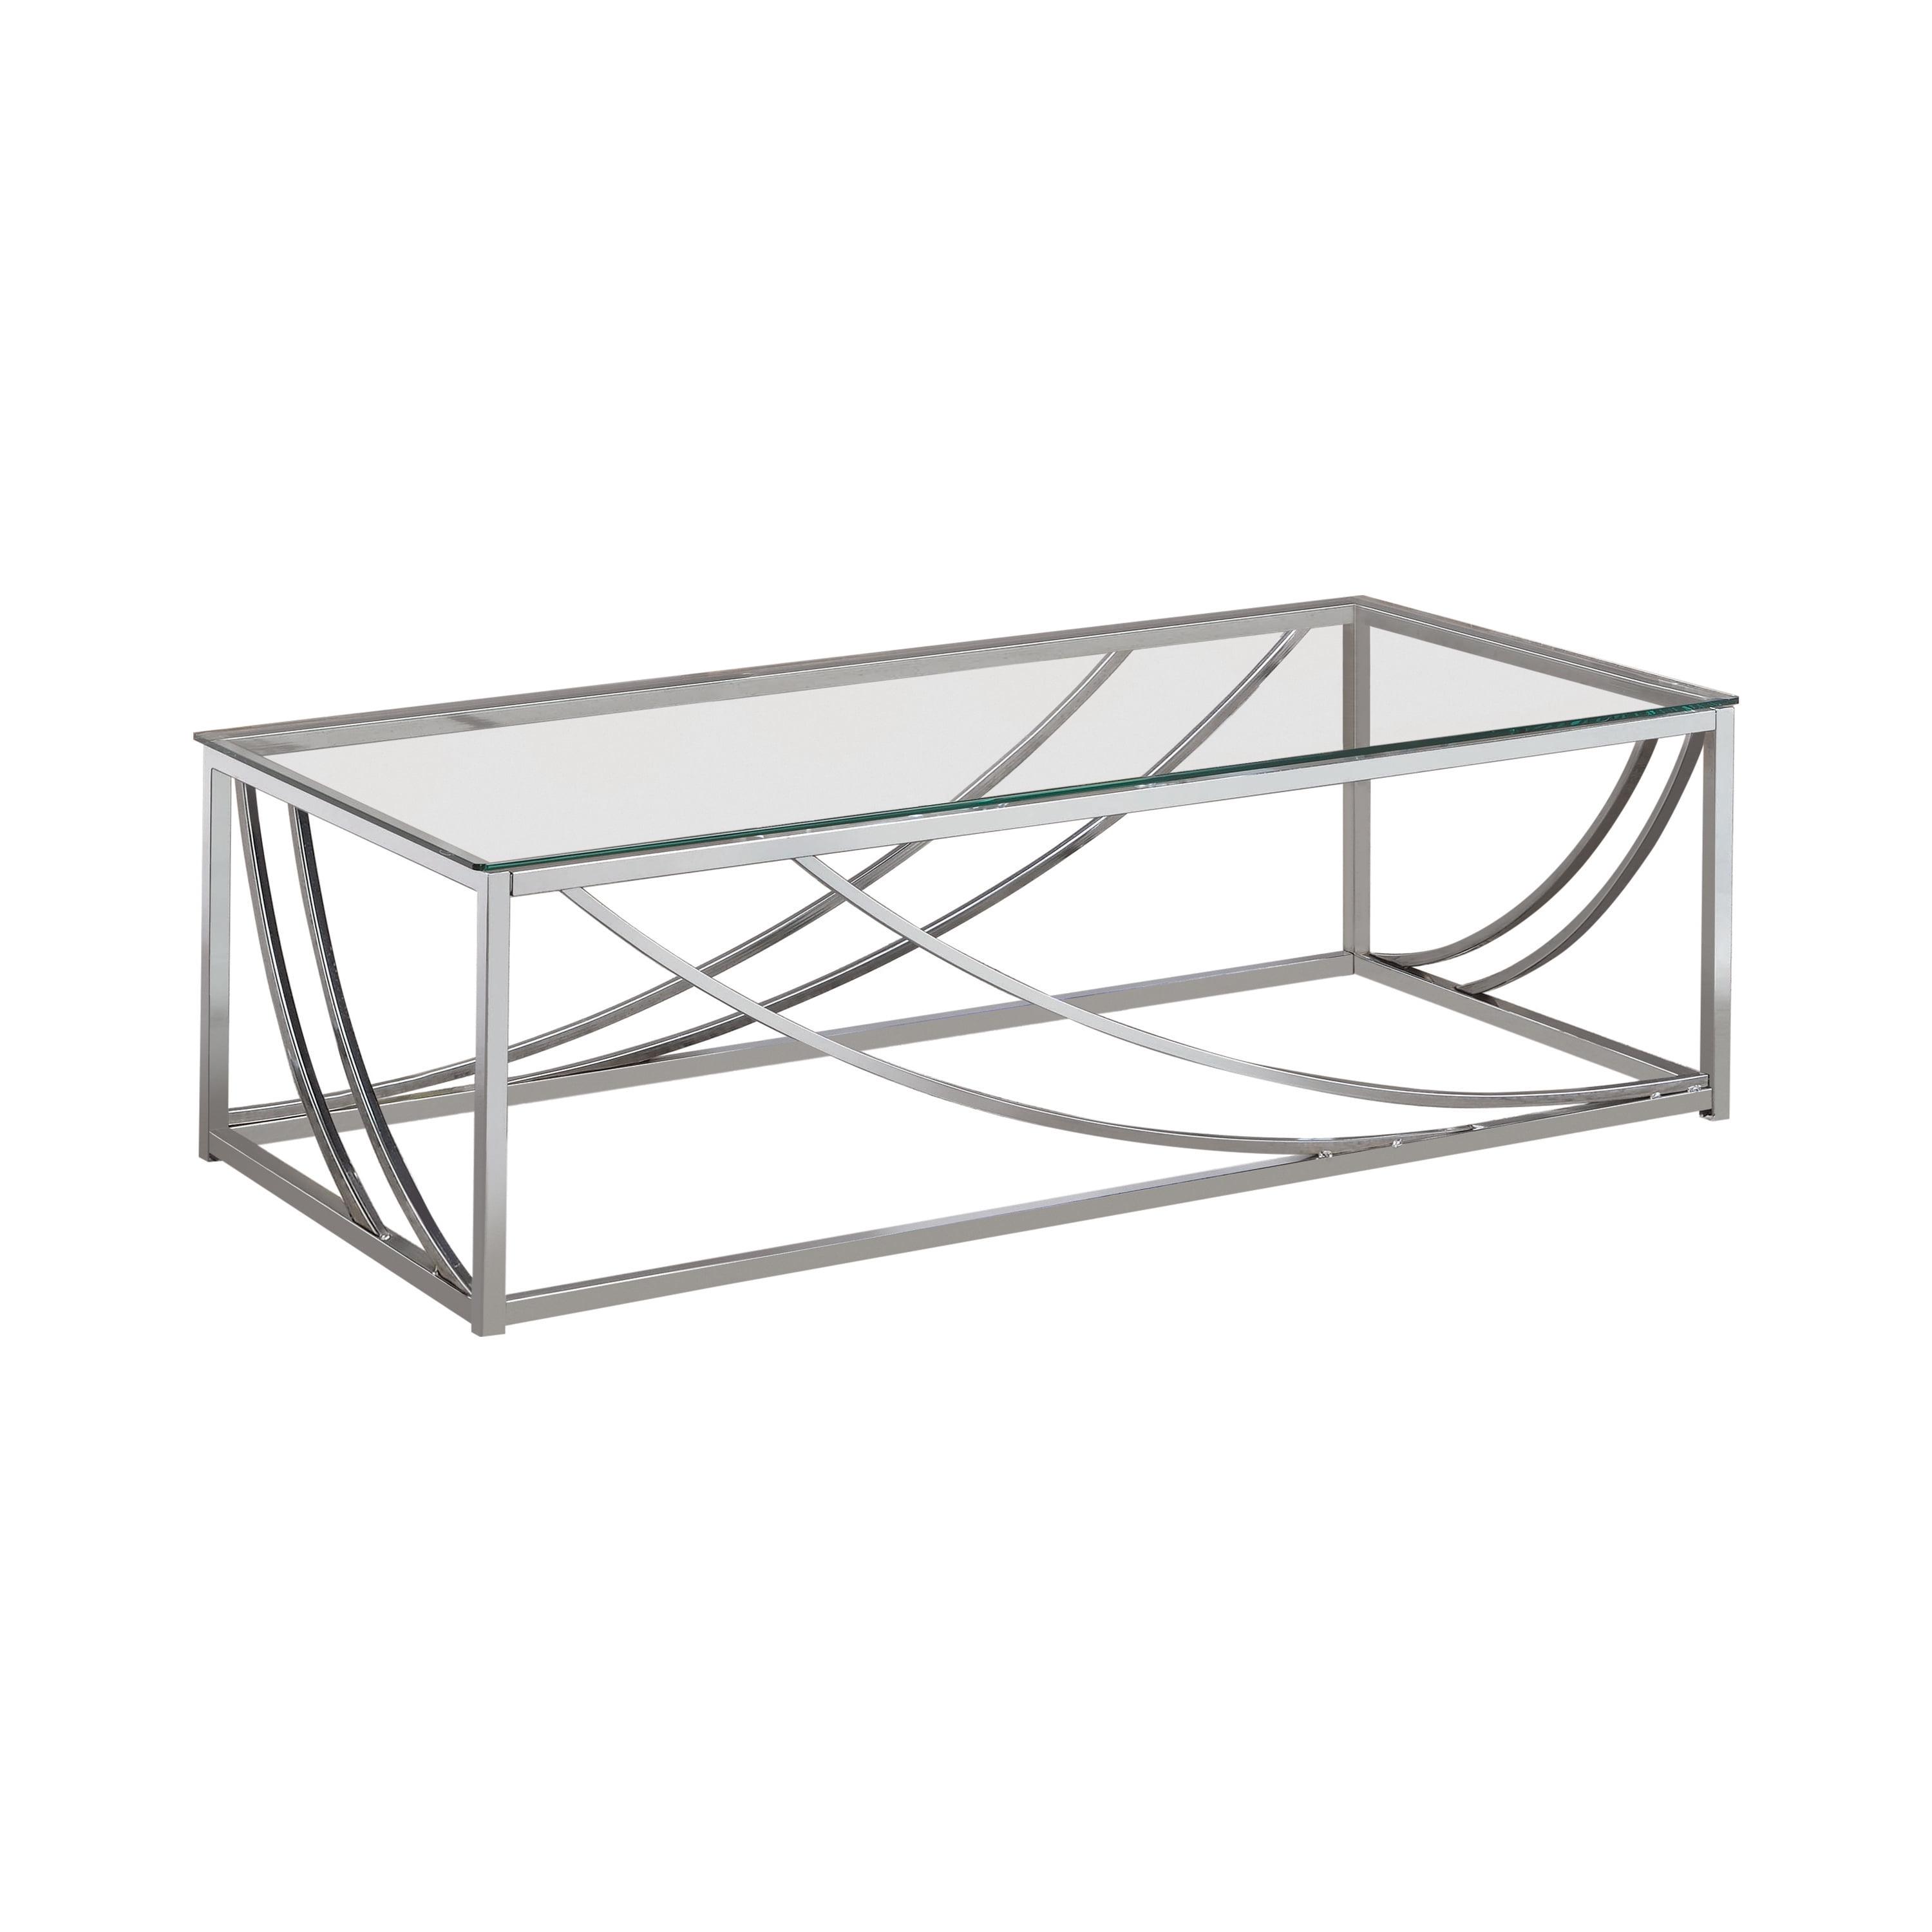 Elegance Chrome 47" Rectangular Coffee Table with Glass Top